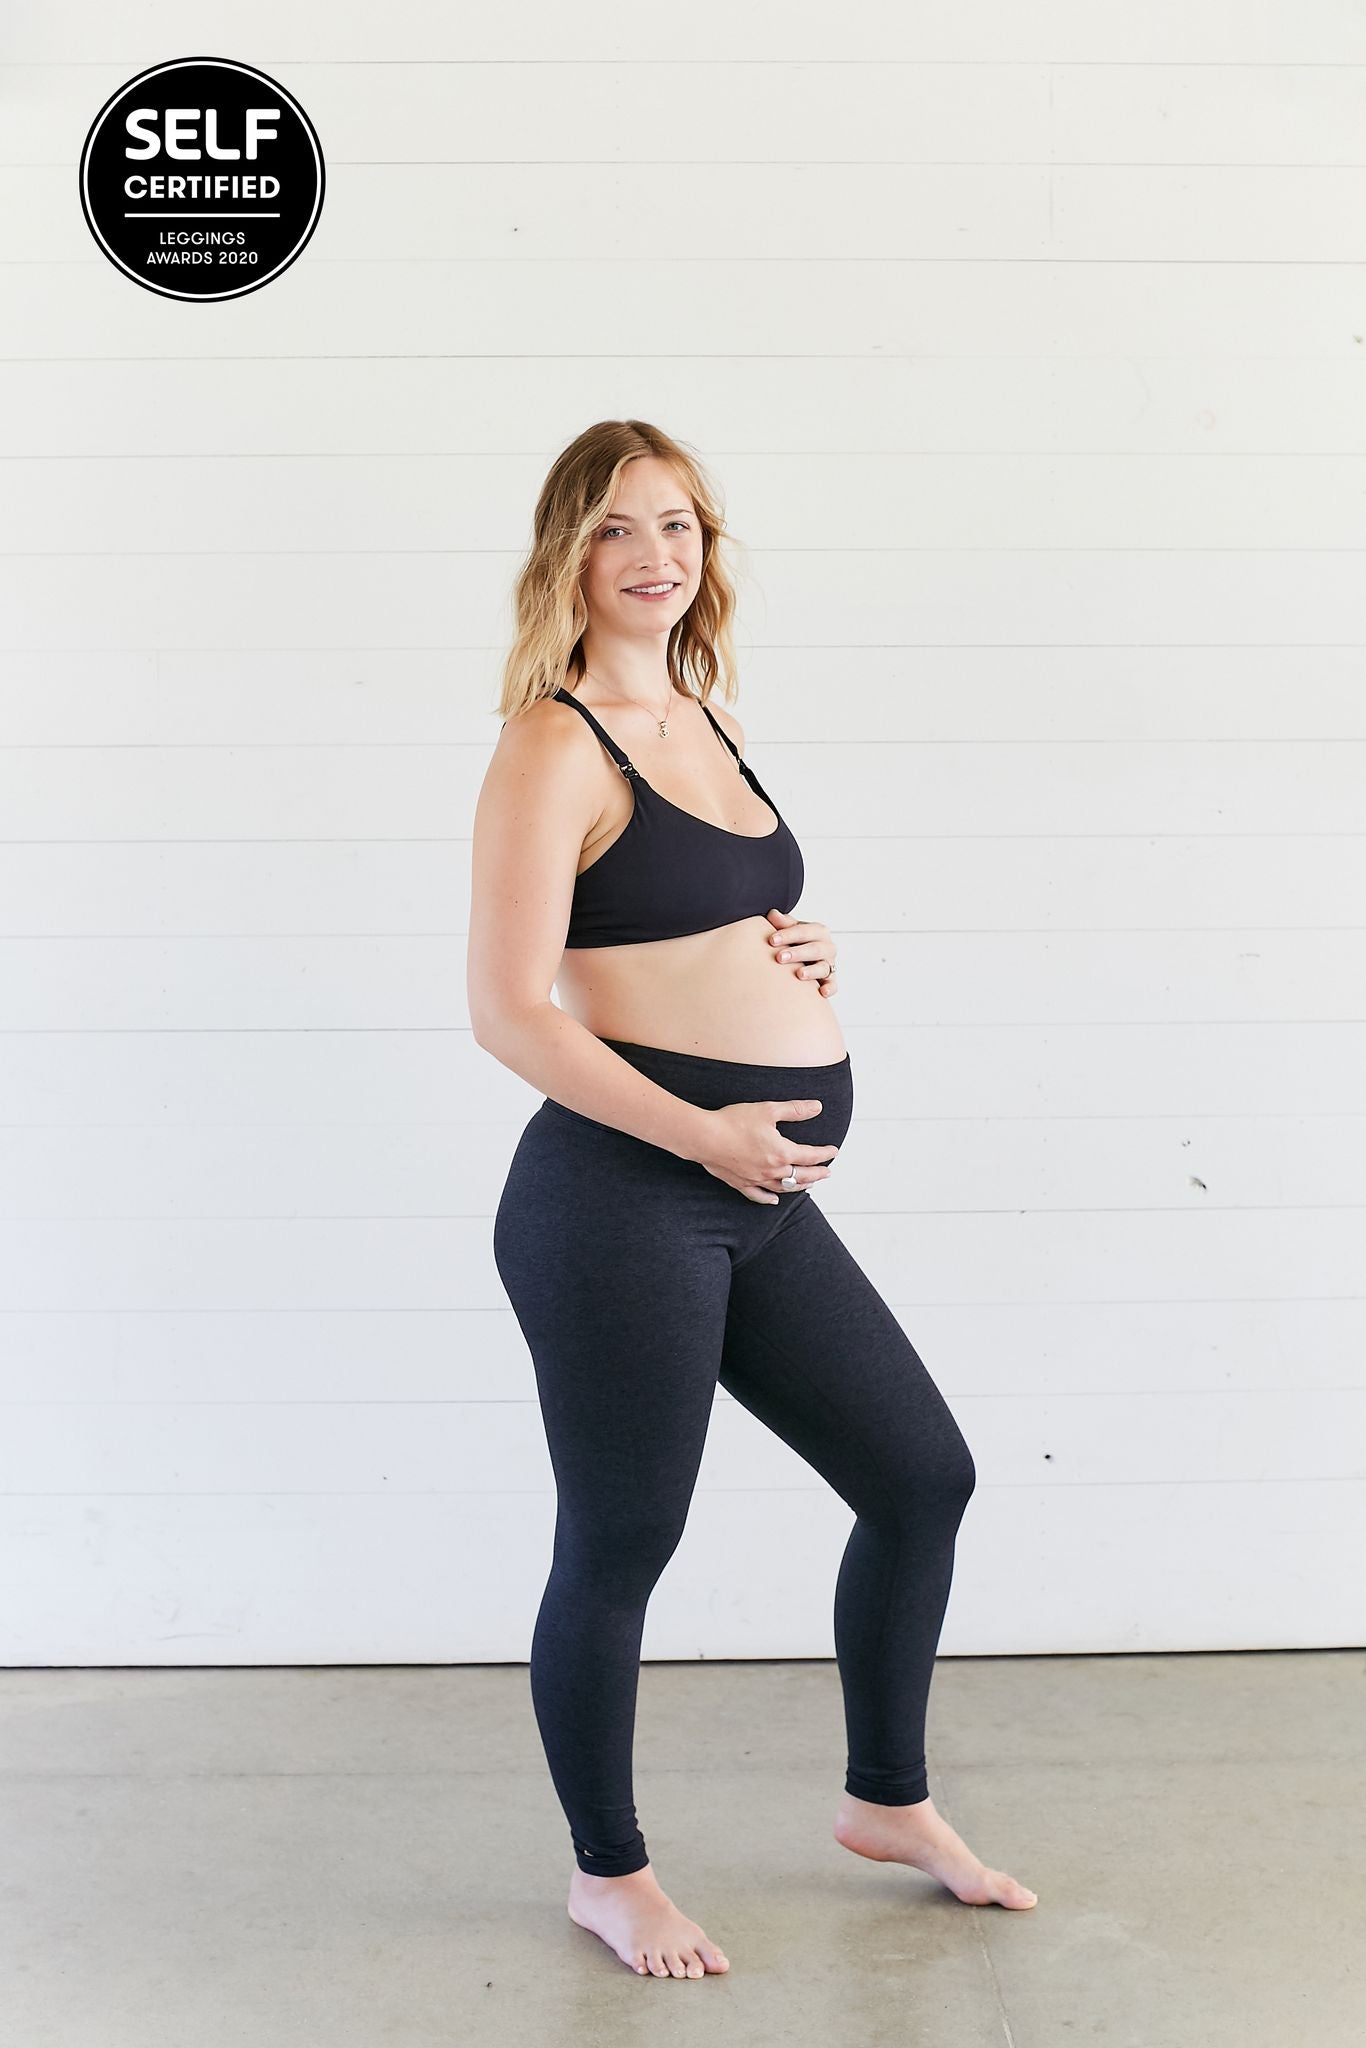 Top Rated Products in Maternity Activewear